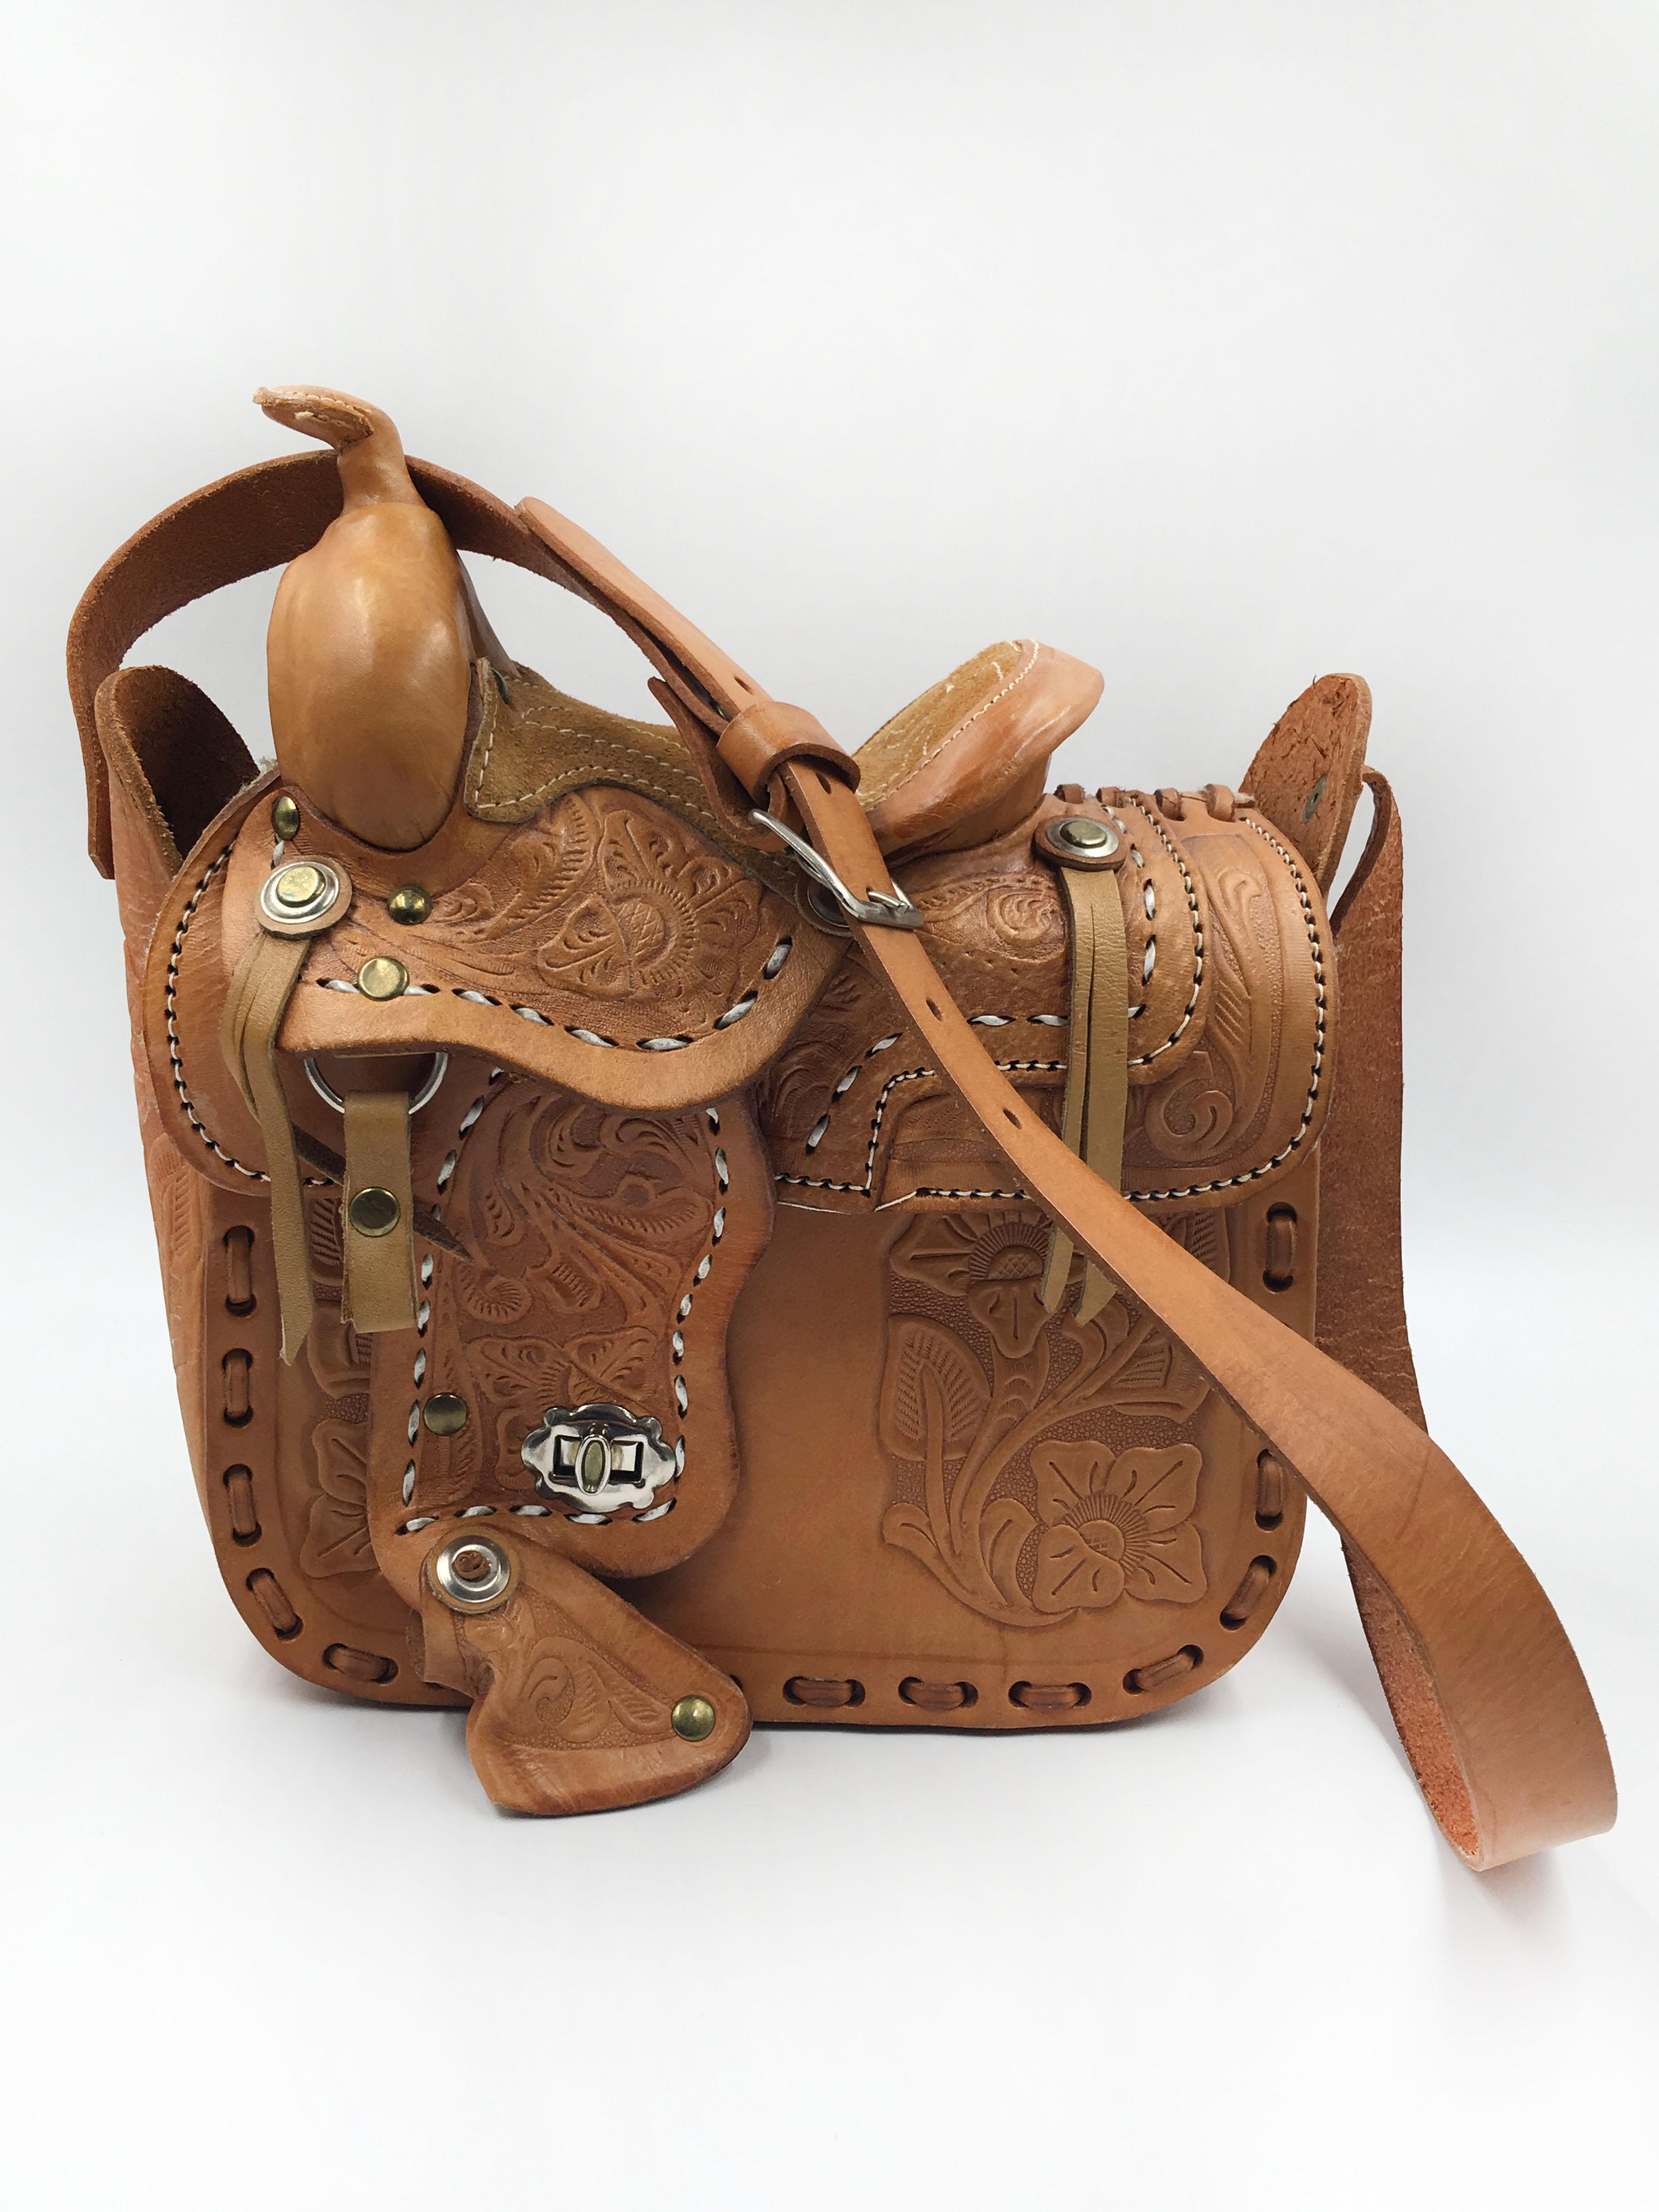 Handmade, Hand Tooled Mexican Leather and Sheepskin Saddle Shoulder Bag. Sheepskin lines the flap and inside the bag is no lining. Never used and leather has never been oiled. Turn style closure. Strap is adjustable with silver buckle. Holes are 1